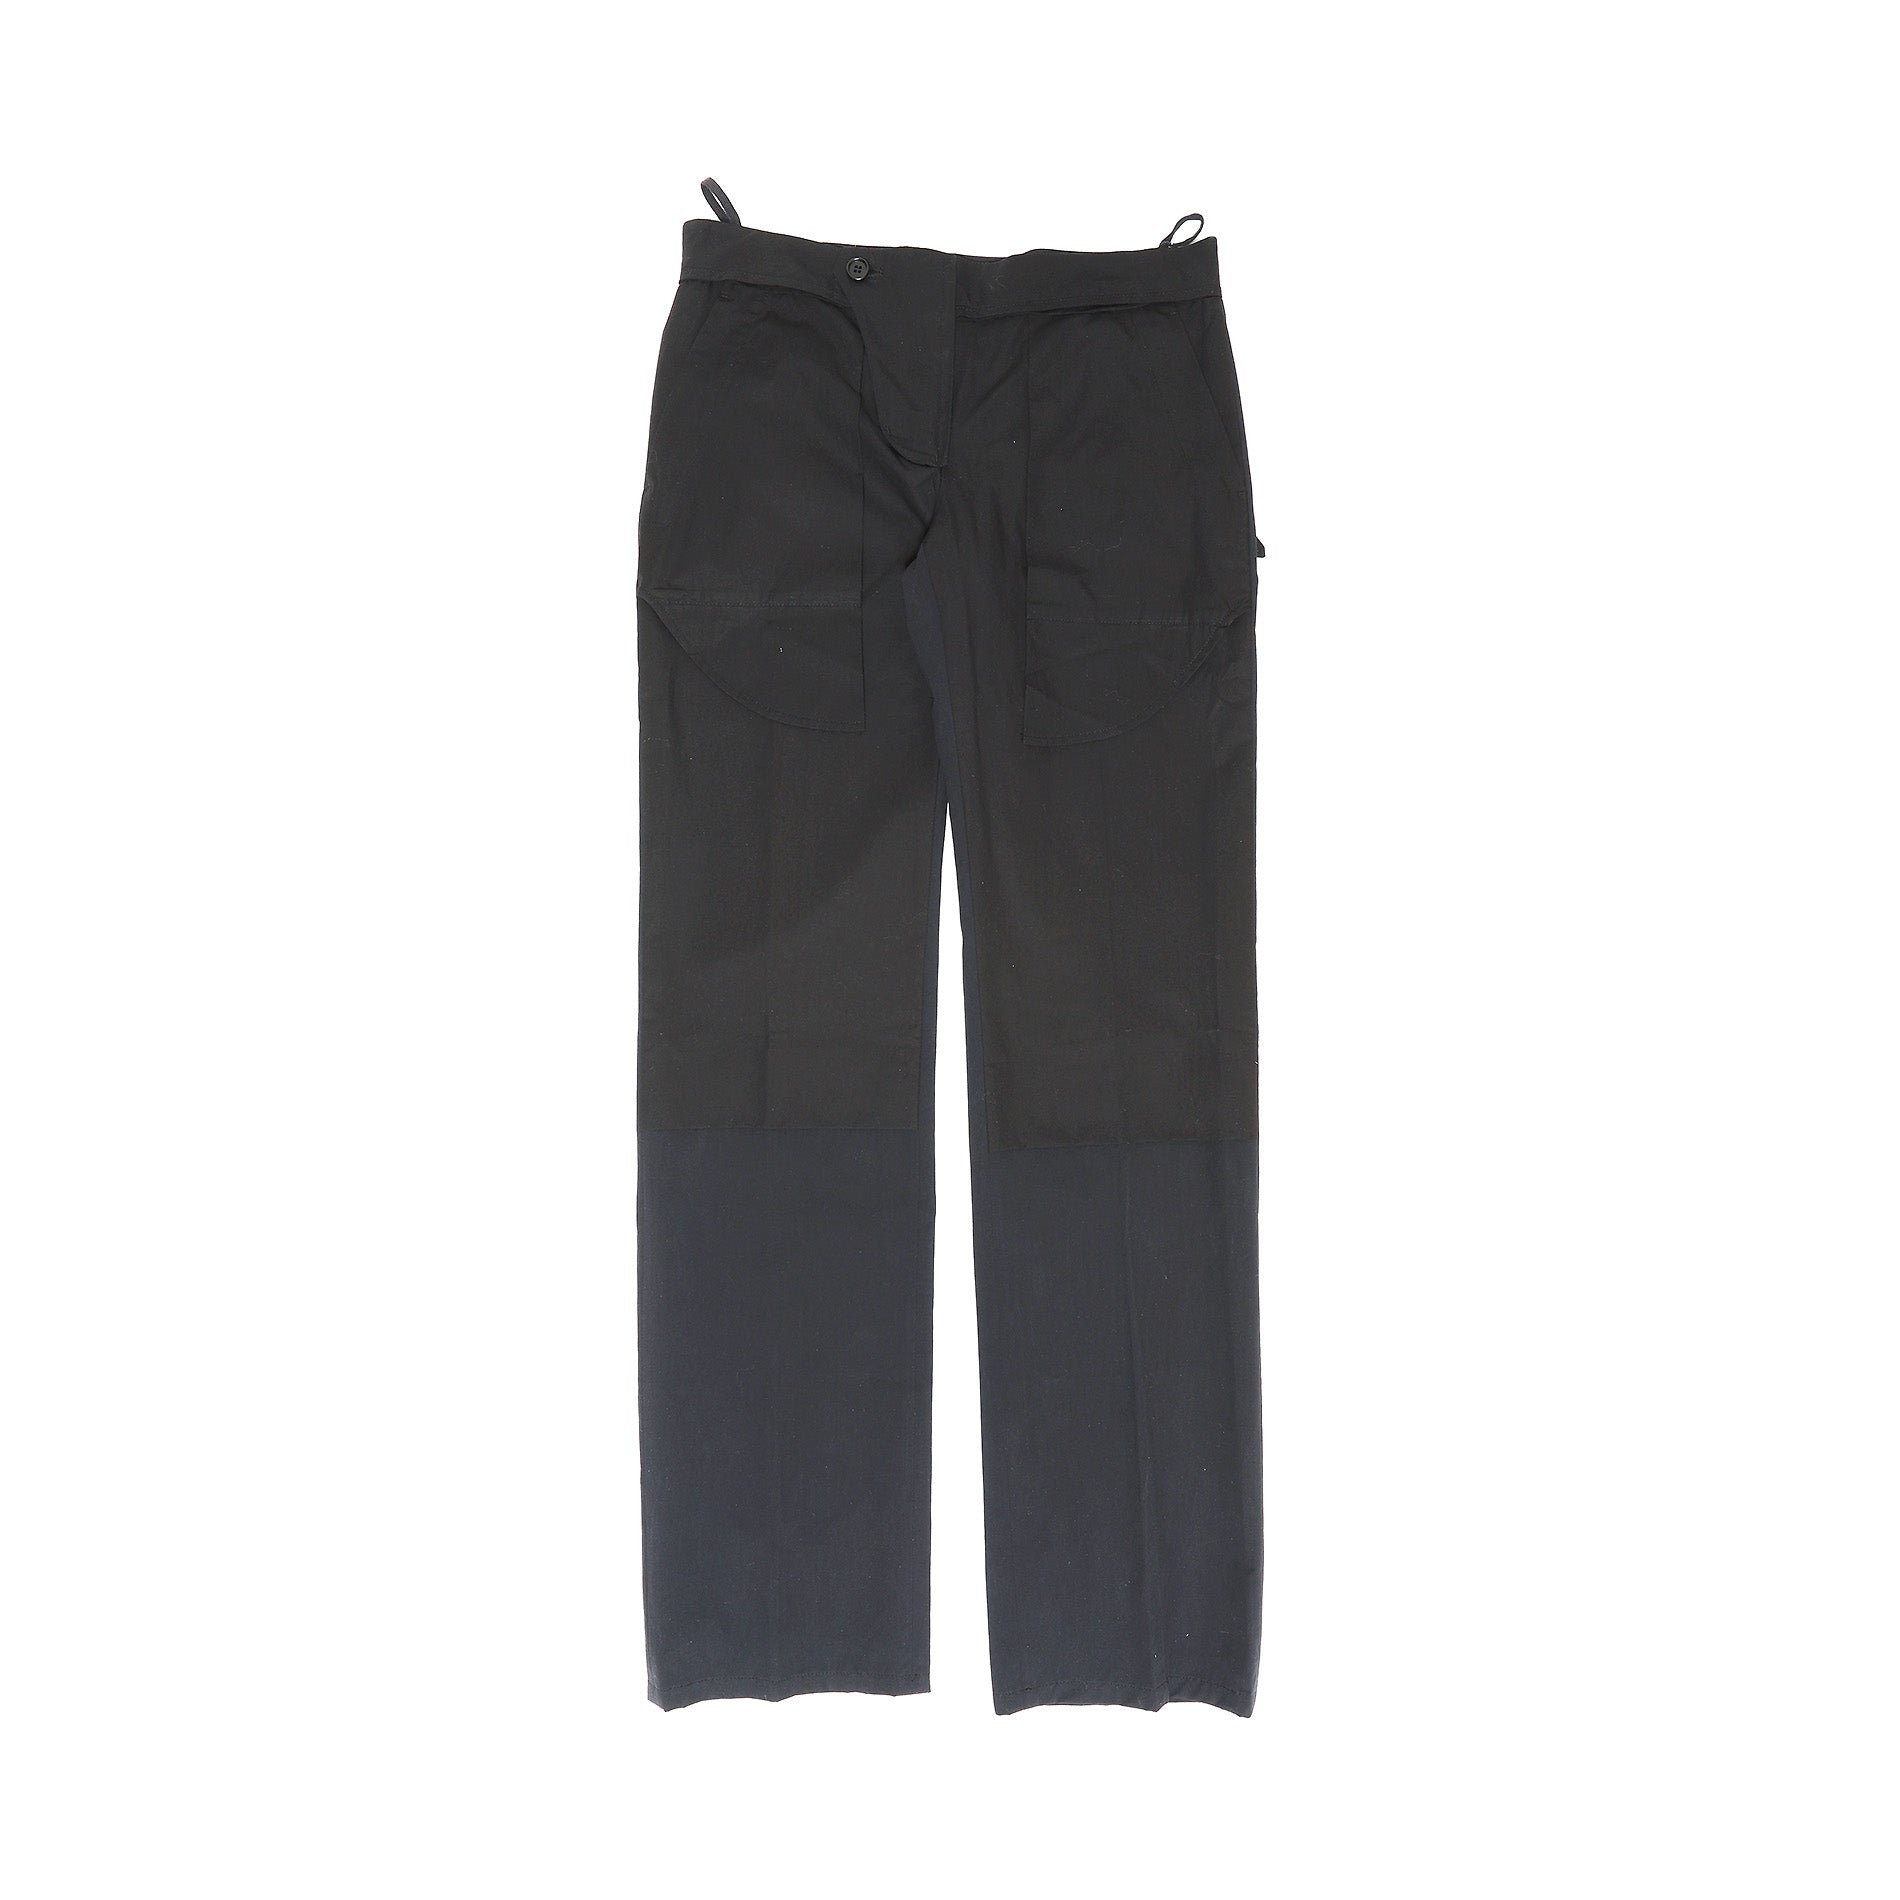 Helmut Lang SS03 Inside Out Chino Pants